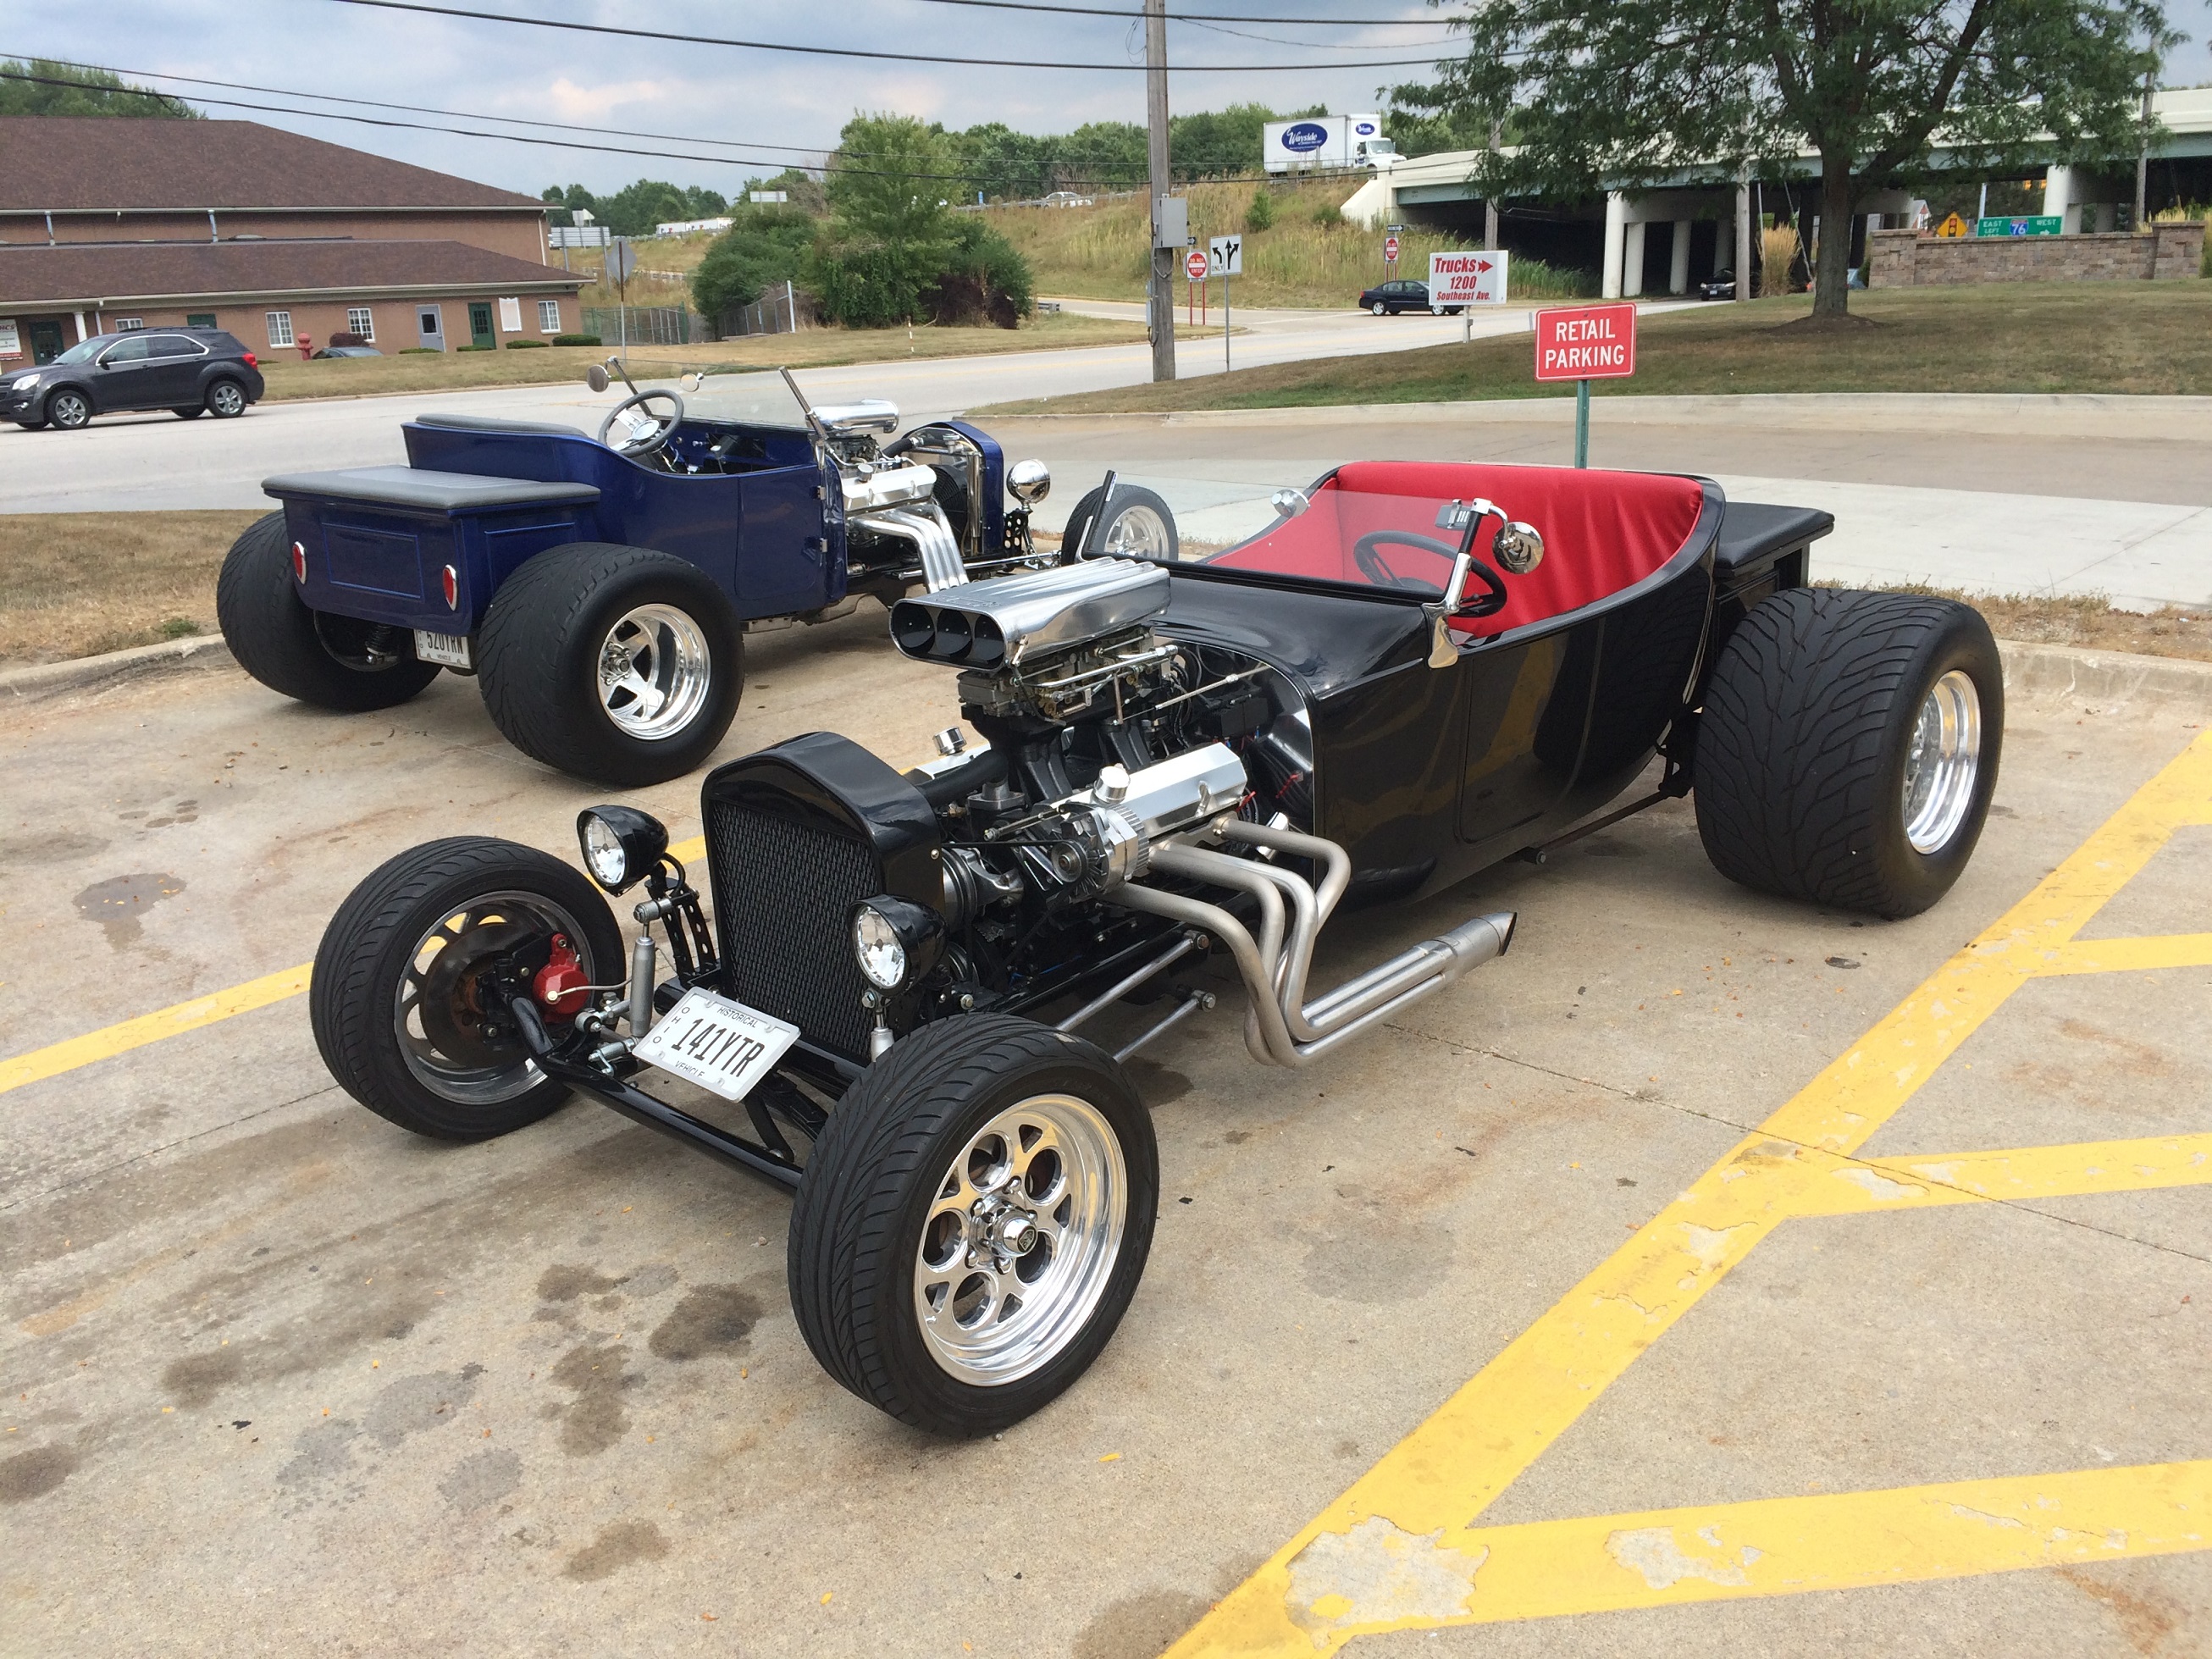 Lot Shots: A Pair of Ford T-Bucket Hot Rods - OnAllCylinders